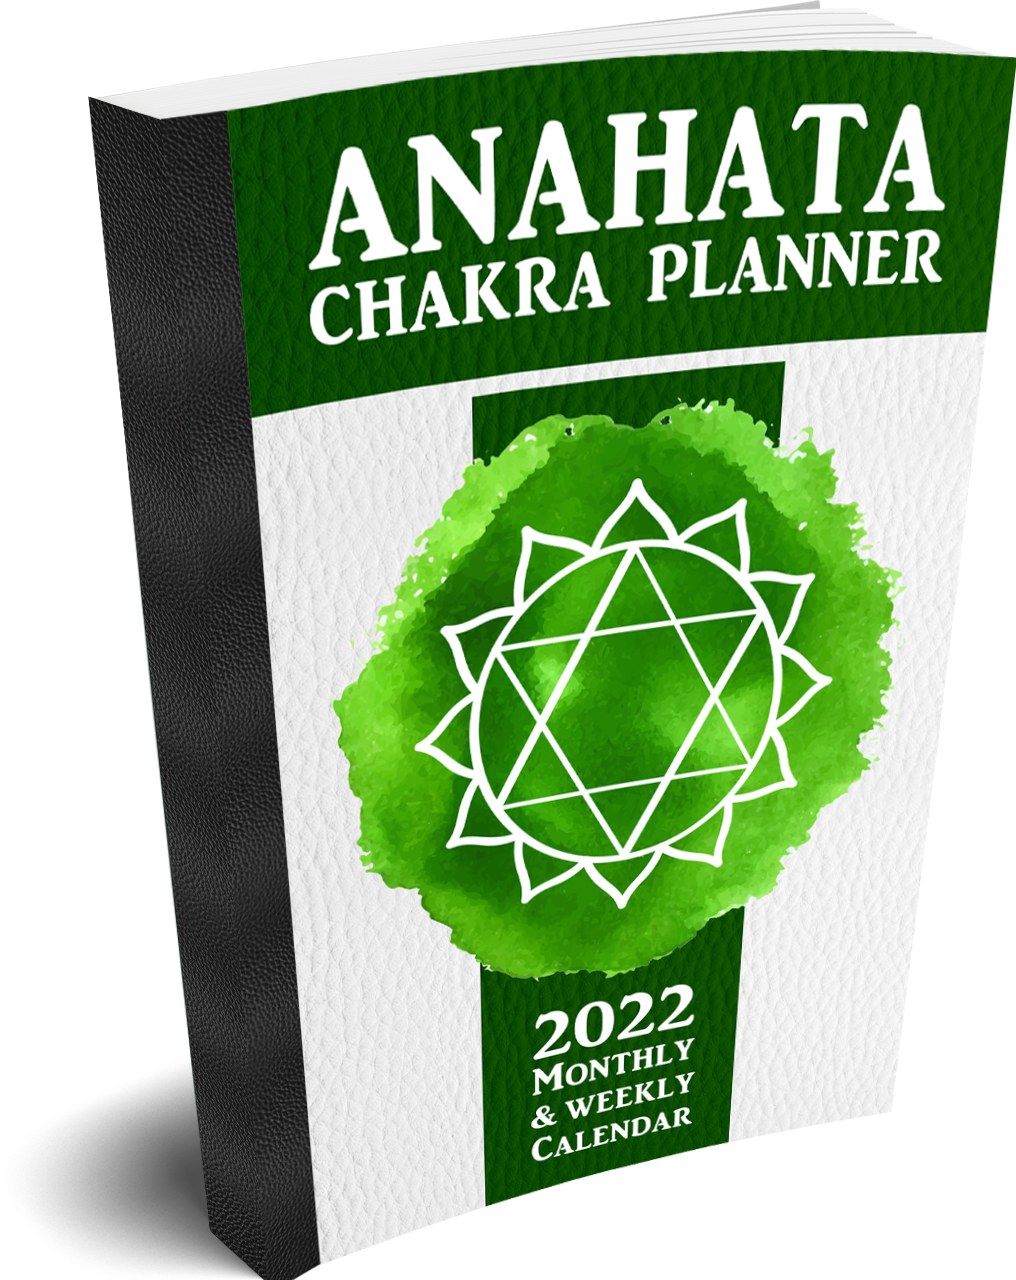 Anahata Chakra Planner—2022 Monthly & Weekly Calendar